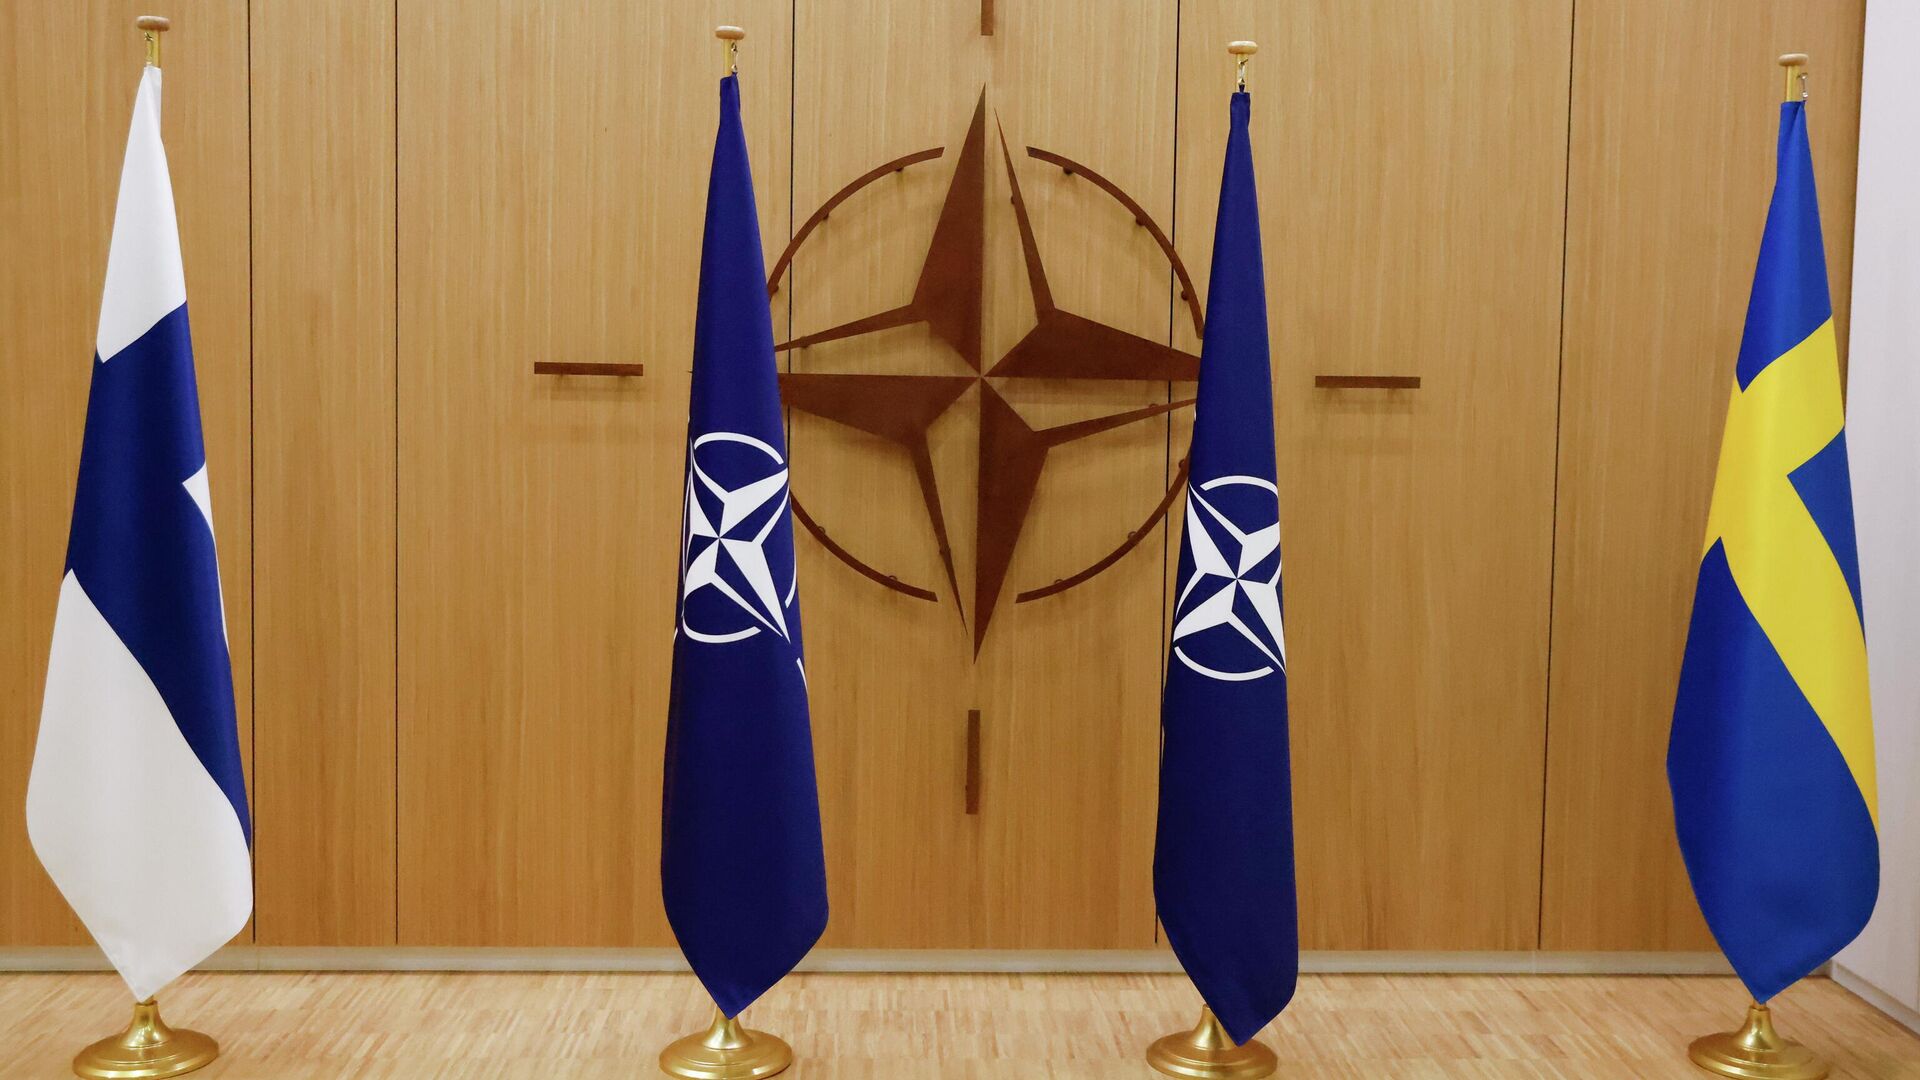 Flags of Finland, left, NATO and Sweden, right, are displayed during a ceremony to mark Sweden's and Finland's application for membership in Brussels, Belgium, Wednesday May 18, 2022. NATO Secretary-General Jens Stoltenberg said that the military alliance stands ready to seize a historic moment and move quickly on allowing Finland and Sweden to join its ranks, after the two countries submitted their membership requests. (Johanna Geron/Pool via AP) - Sputnik International, 1920, 13.07.2022